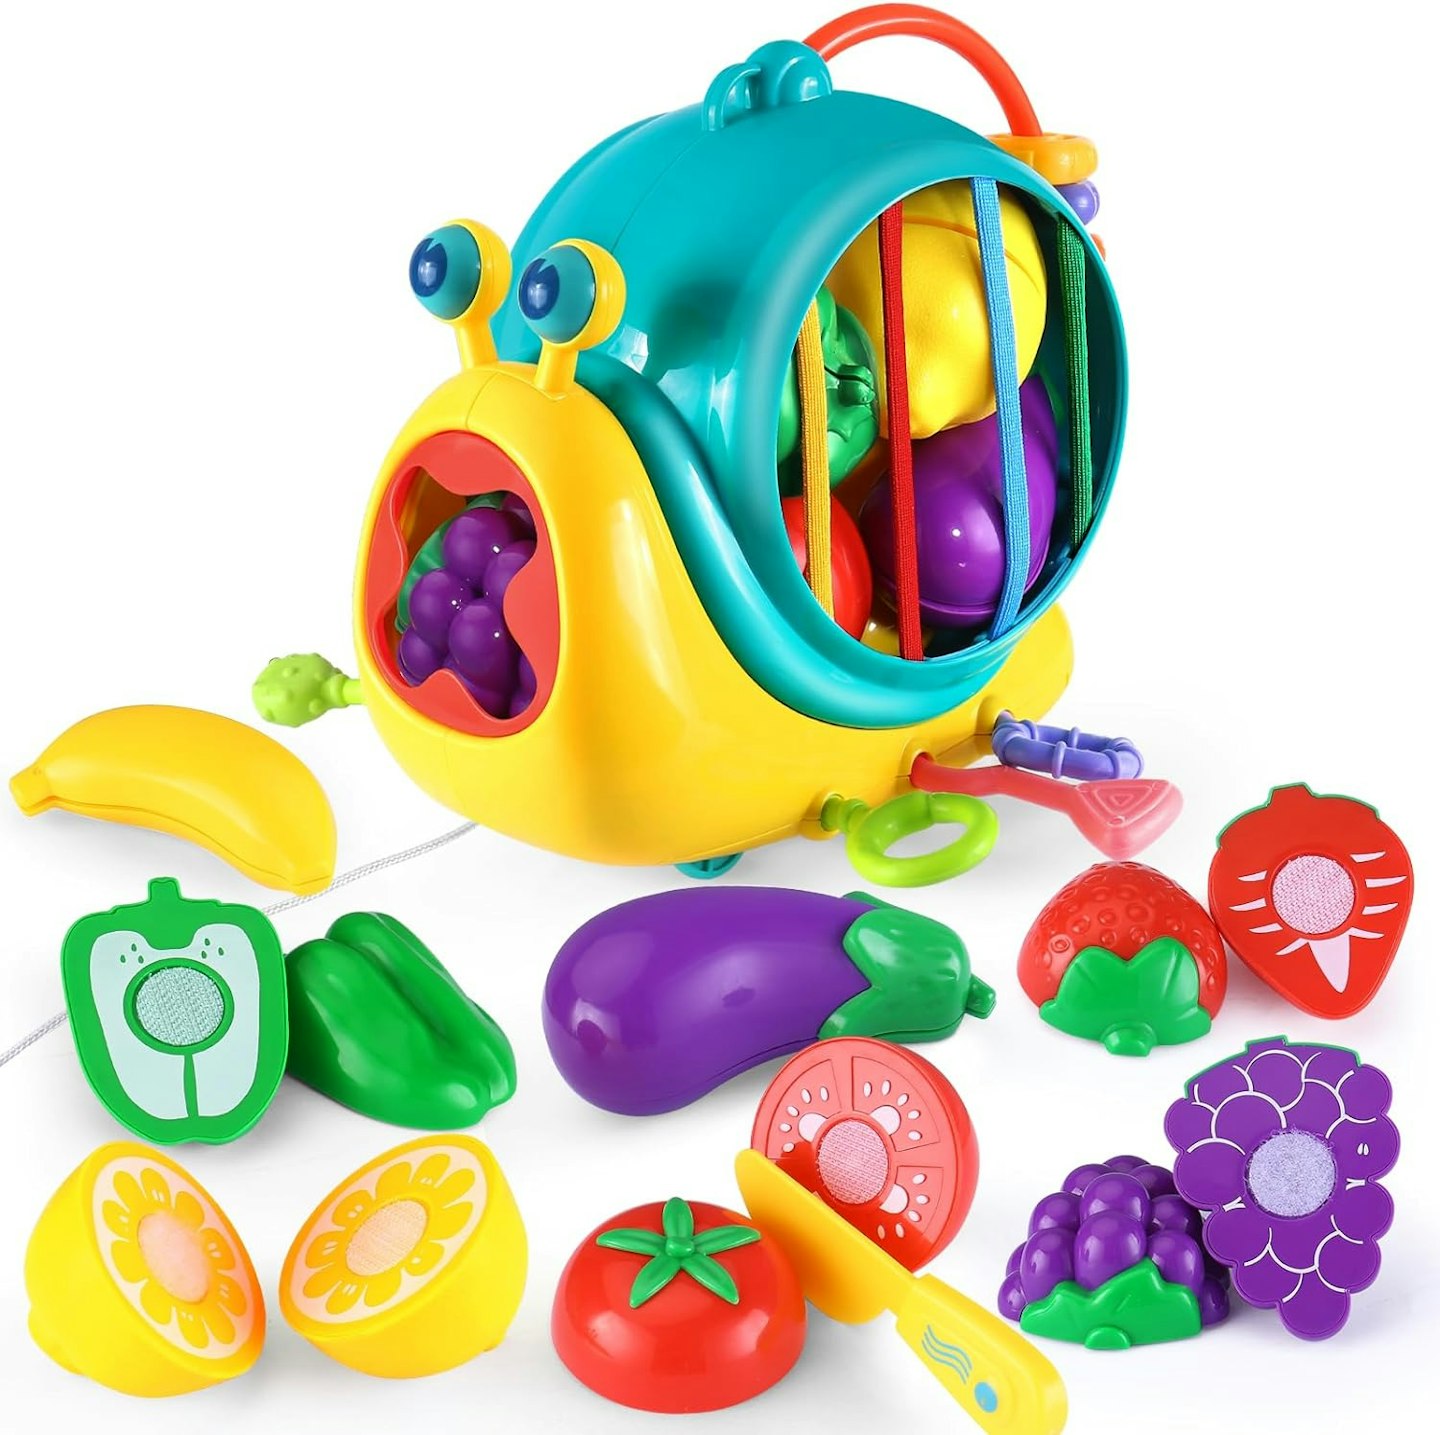 Cute snail car toy that doubles up as a bag to hold a variety of plastic fruit